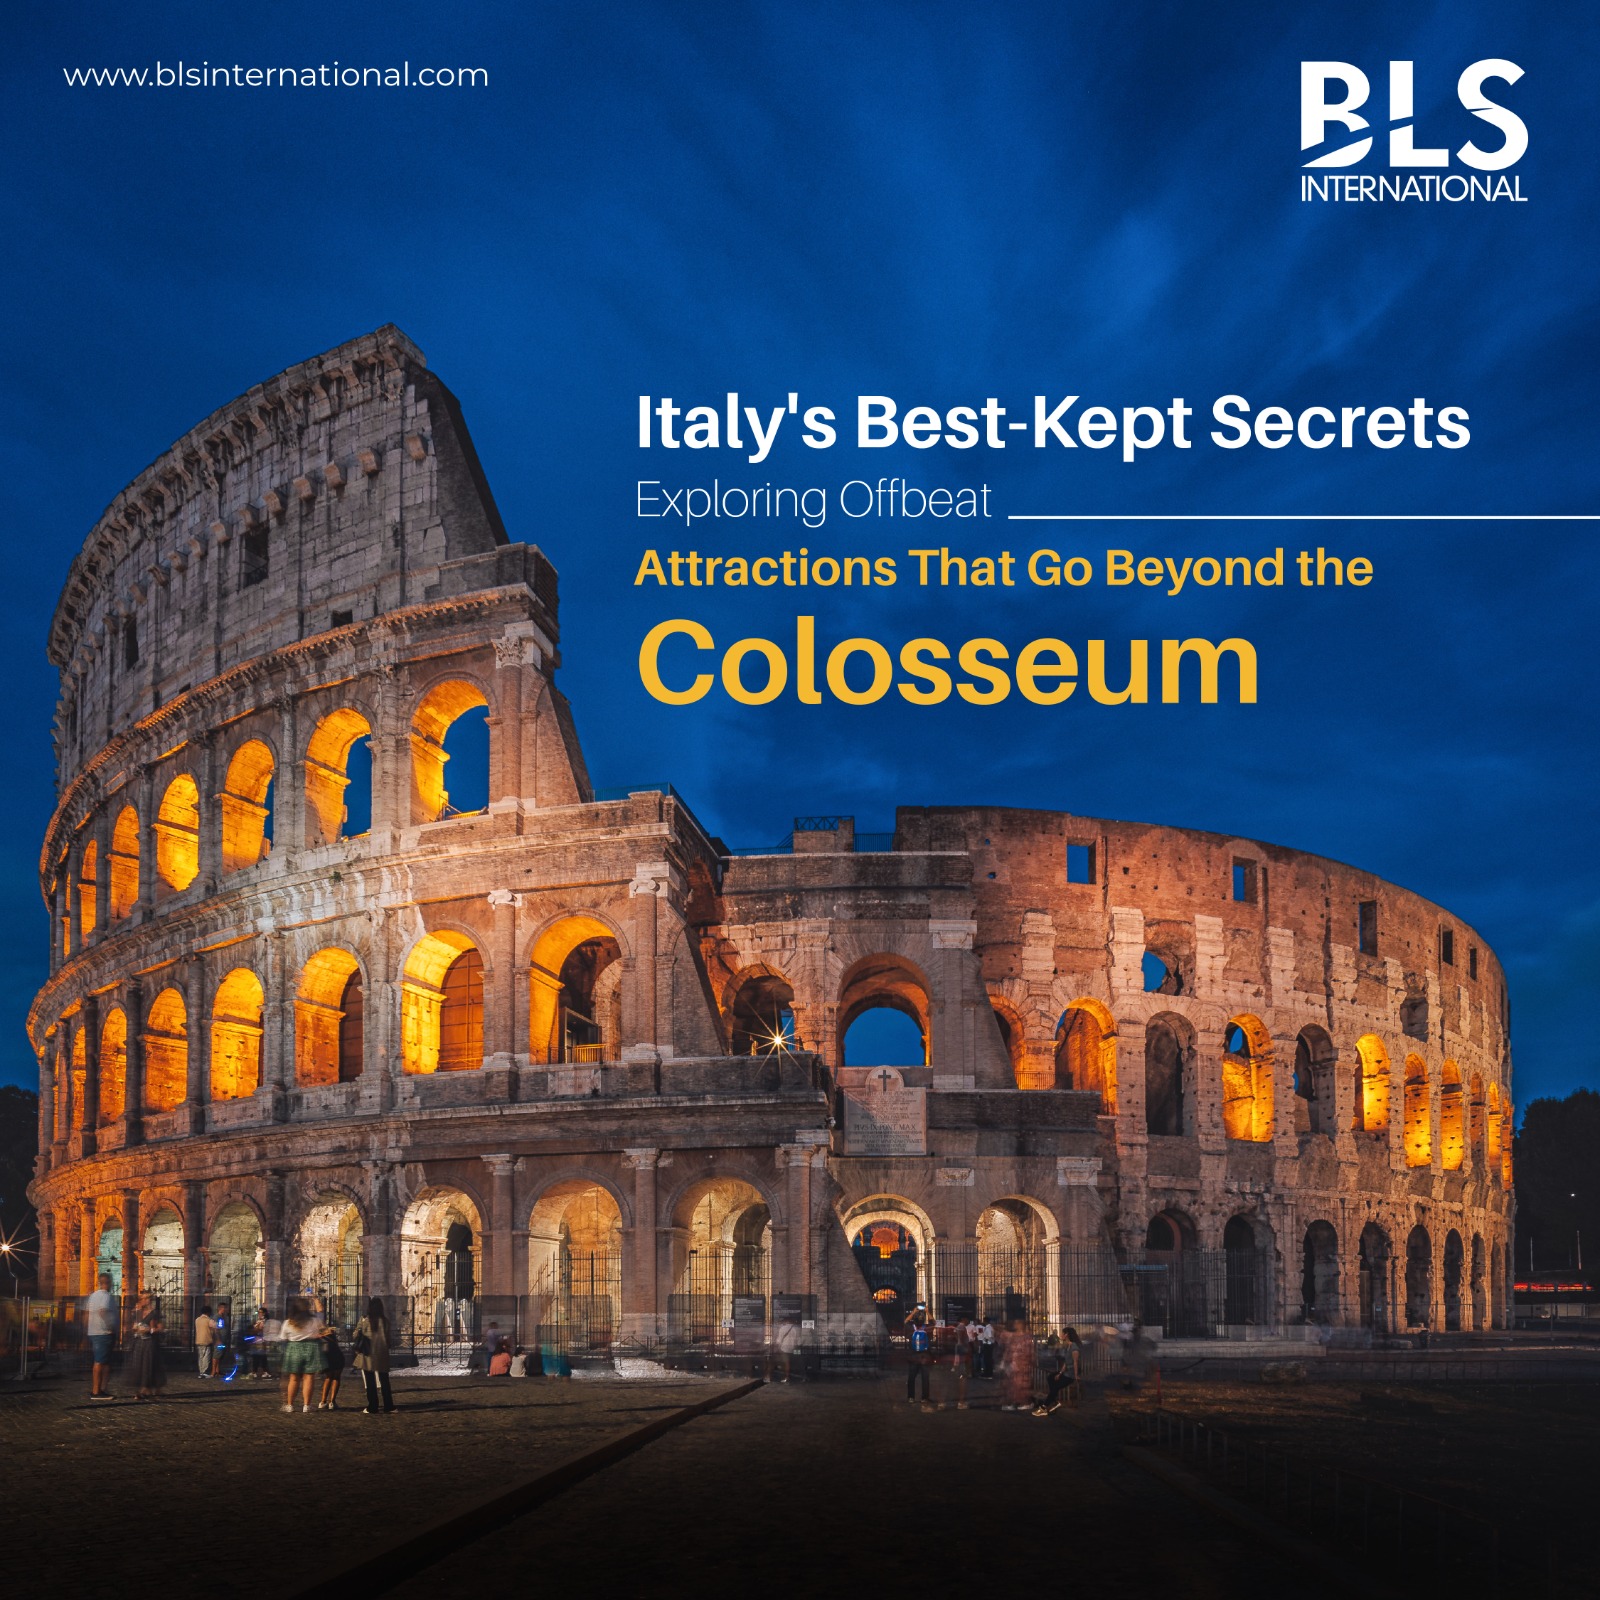 Italy’s Best-Kept Secrets: Exploring Offbeat Attractions That Go Beyond the Colosseum